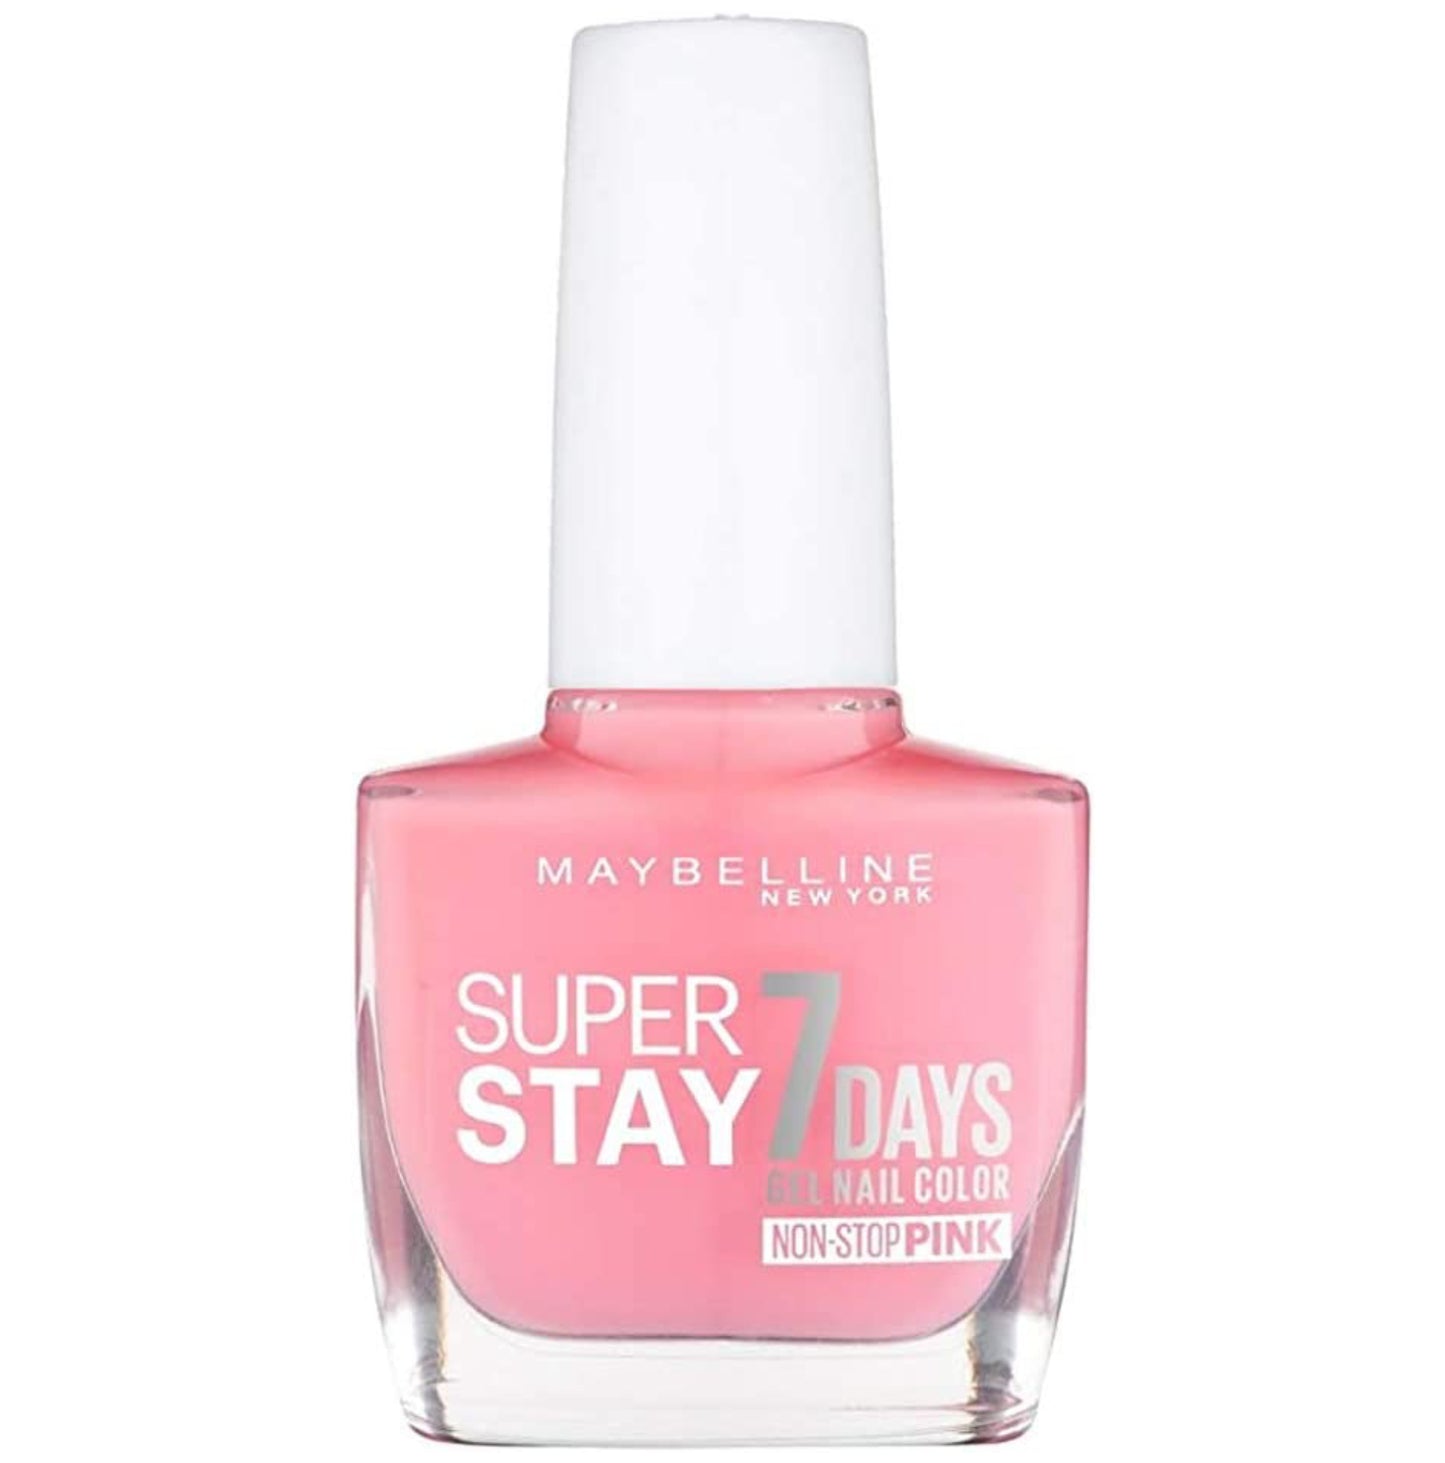 SuperStay 7 Days Gel Nail Color Polish 10ml